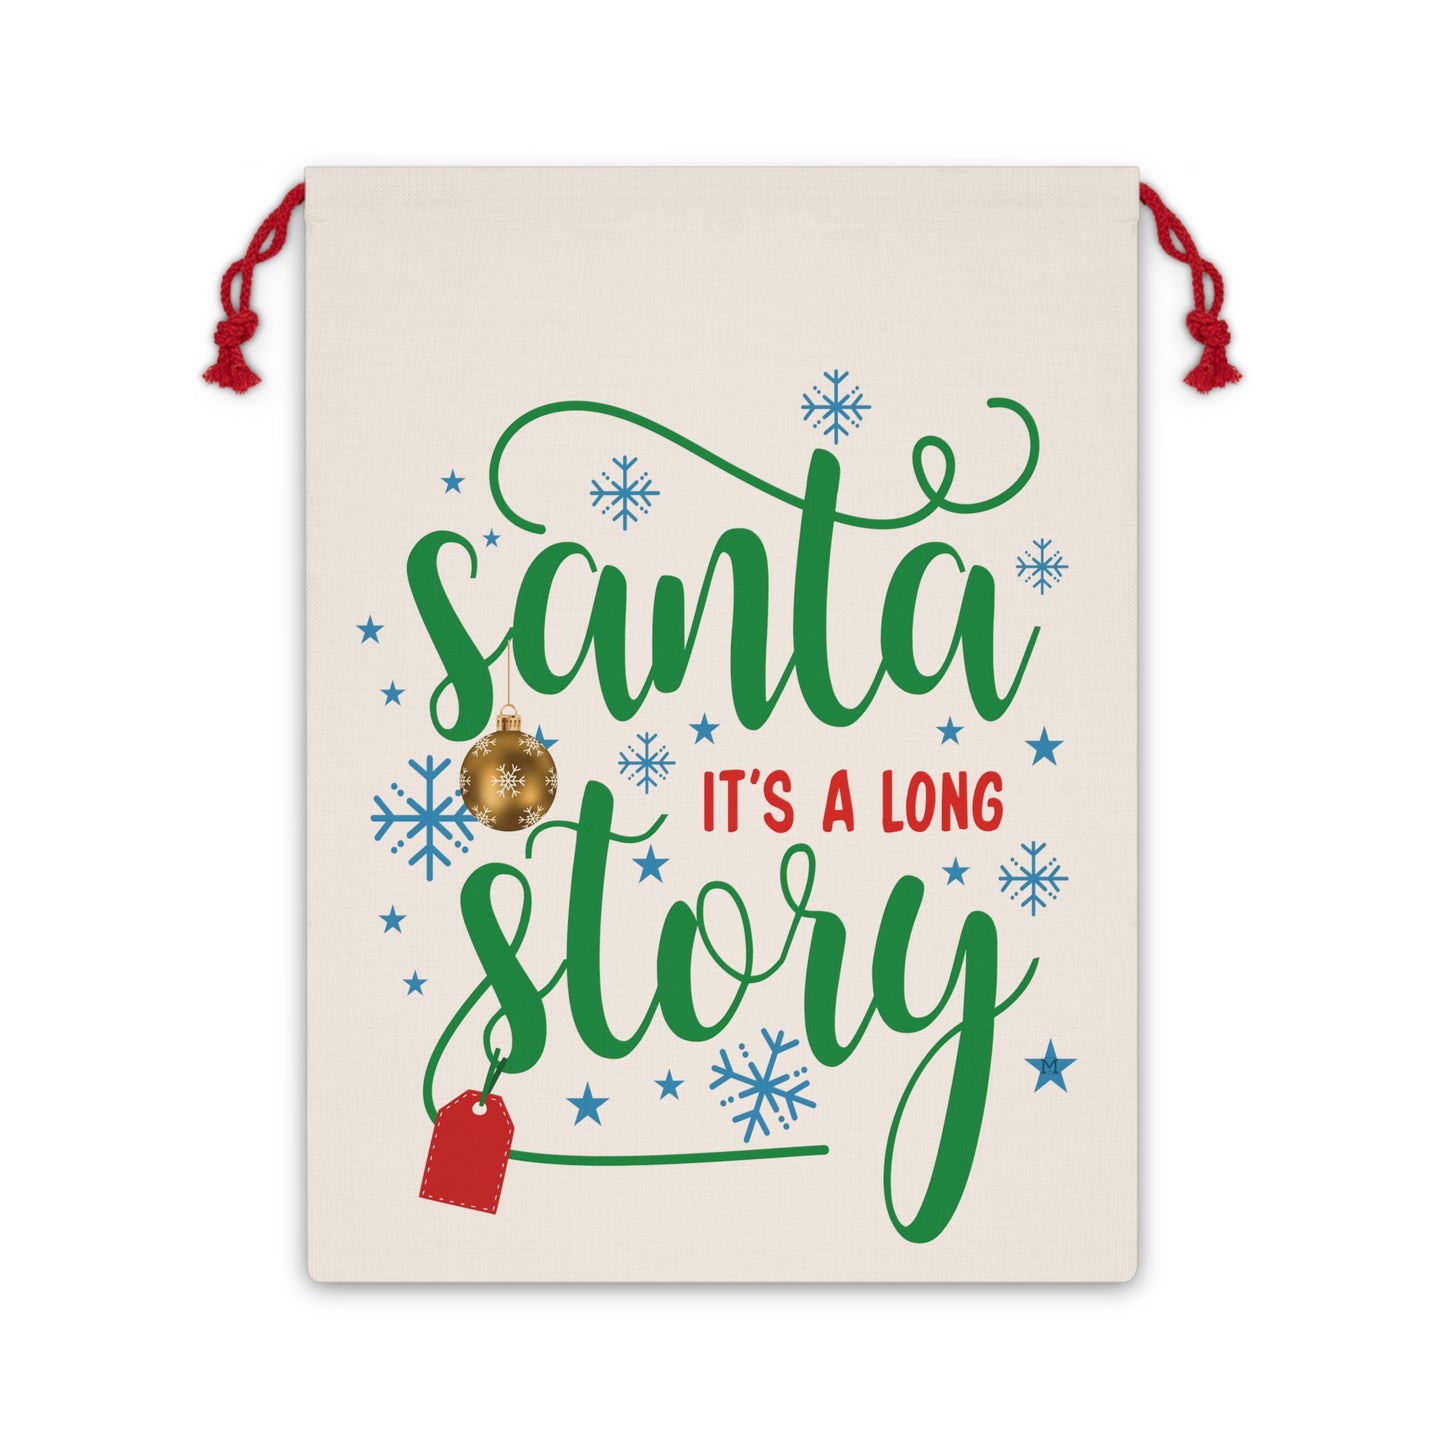 Santa, It's a Long Story... Vintage Linen Drawstring Bag Great for Gifts 19.7" x 26" x .50" inches, Green Alternative to Plastics, Design by MII